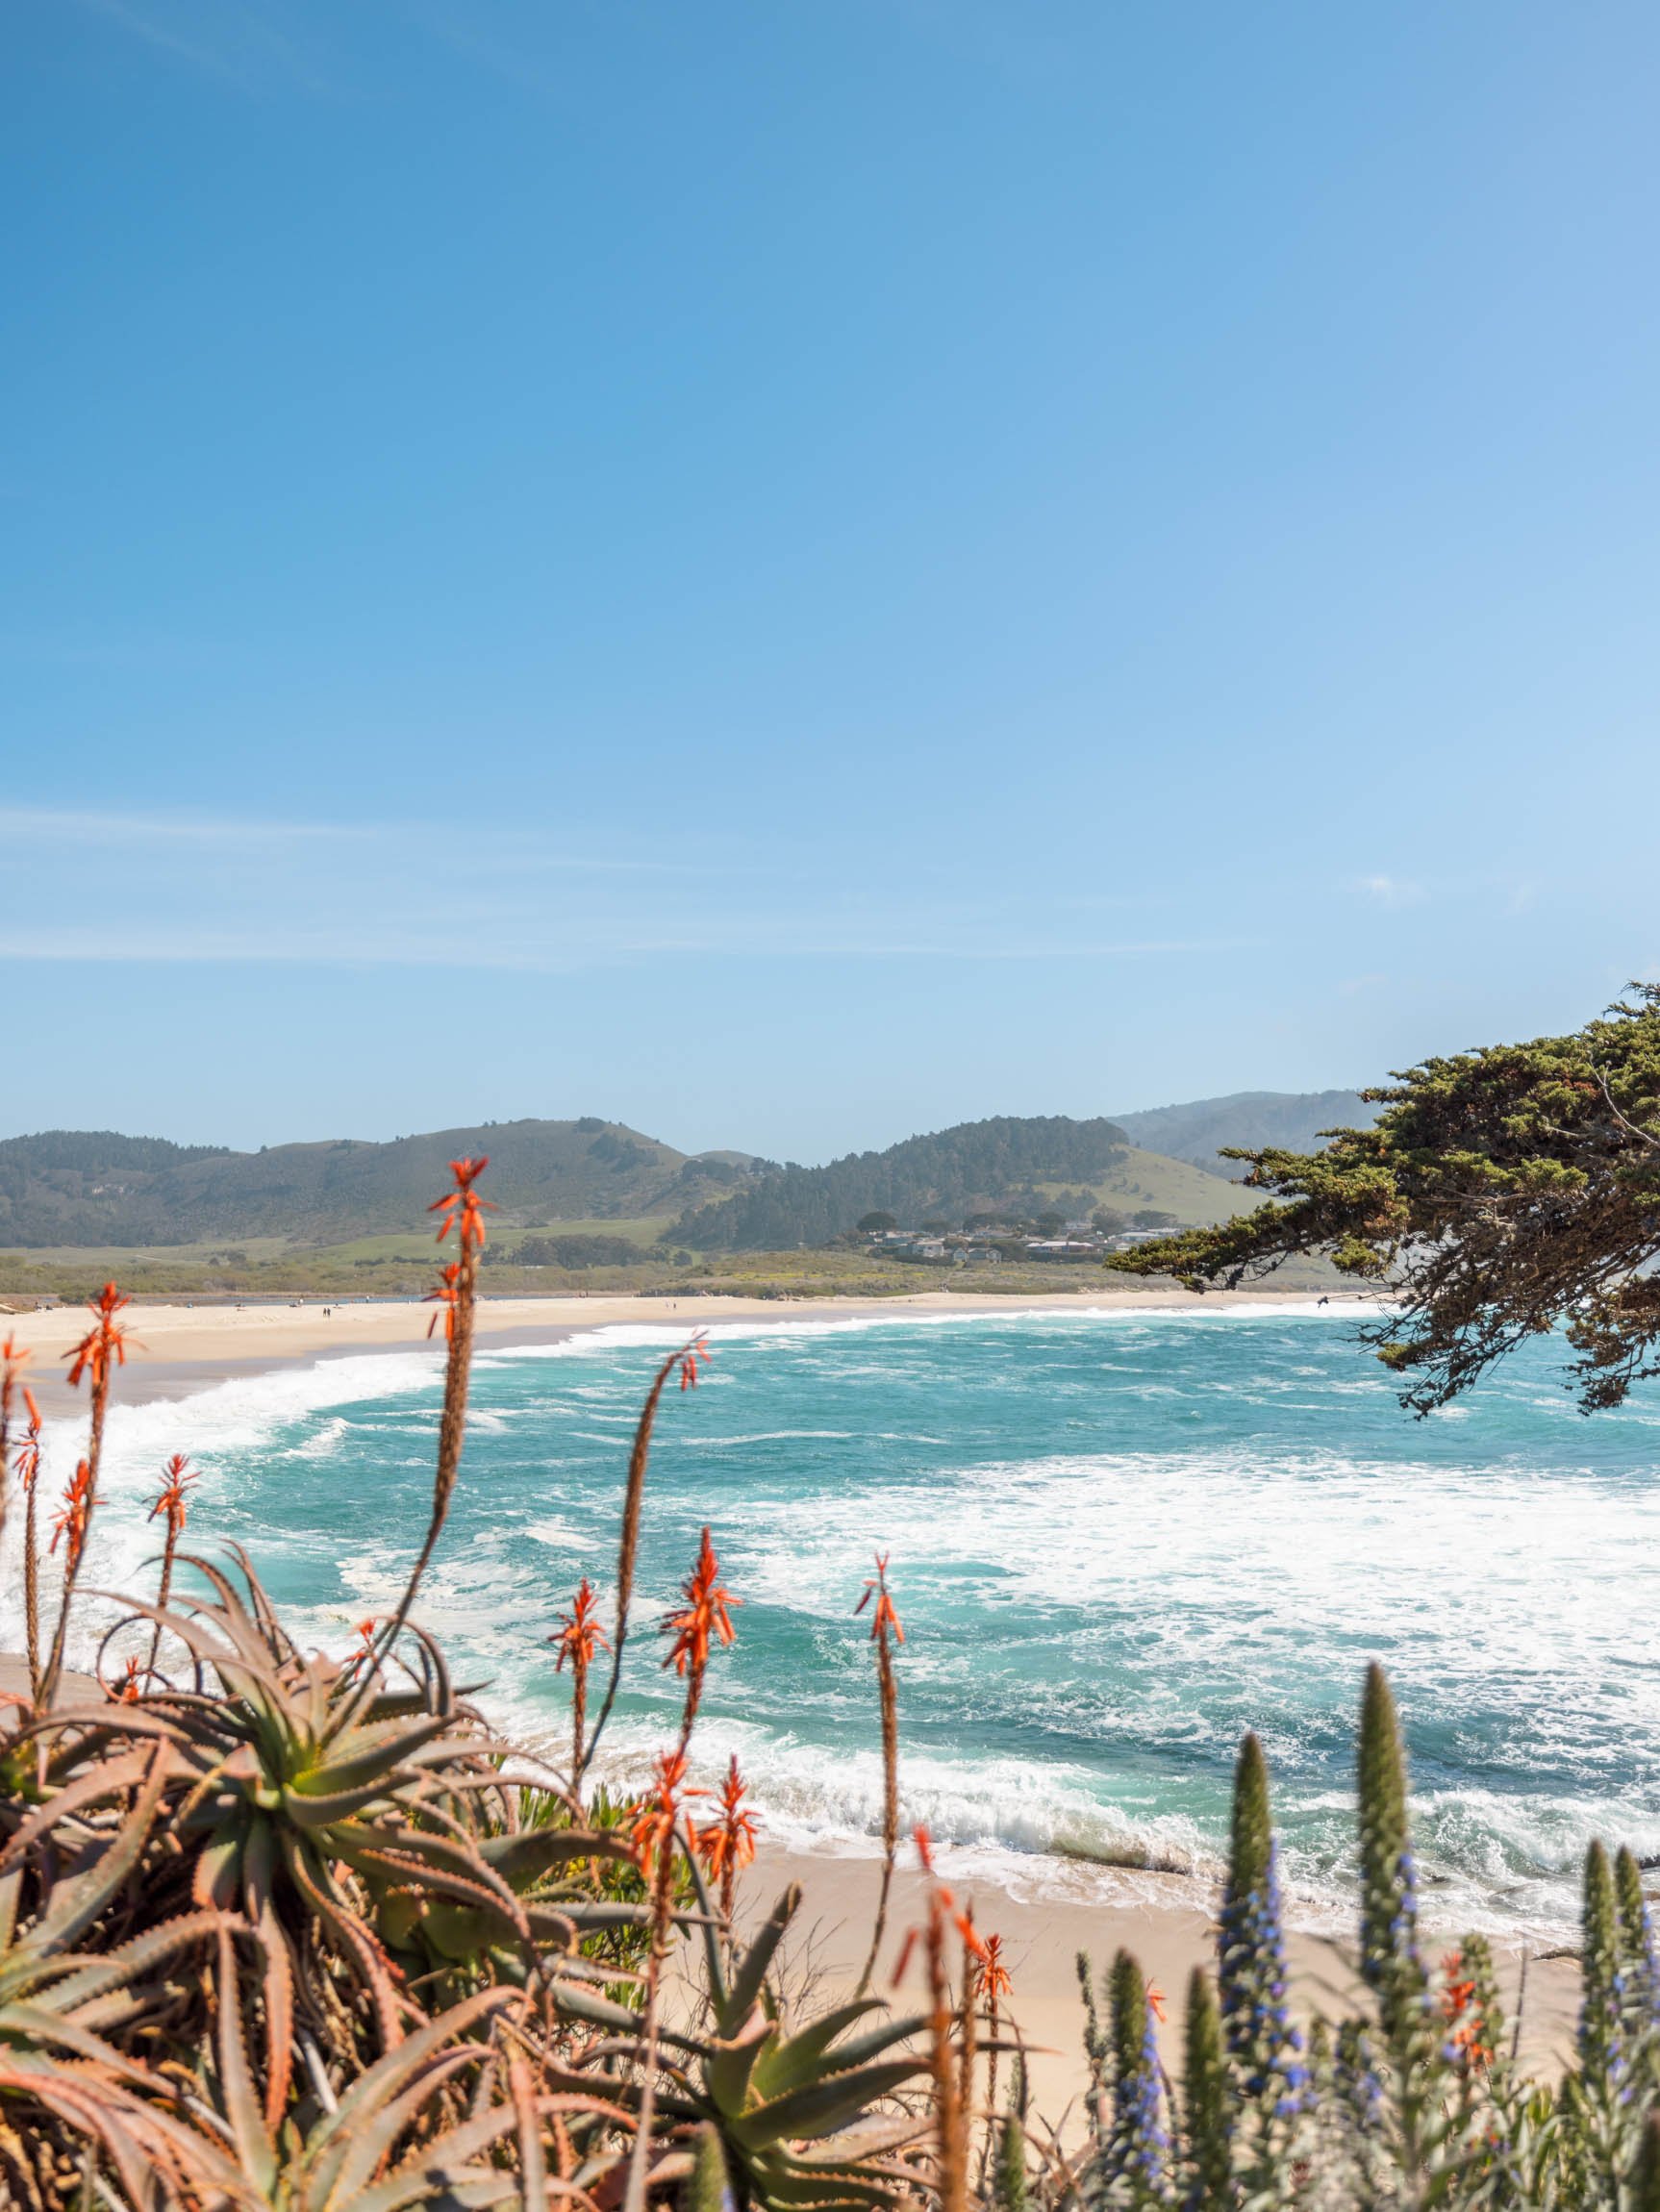 Day Trip To Carmel-by-the-Sea, California - Best Things To Do and See